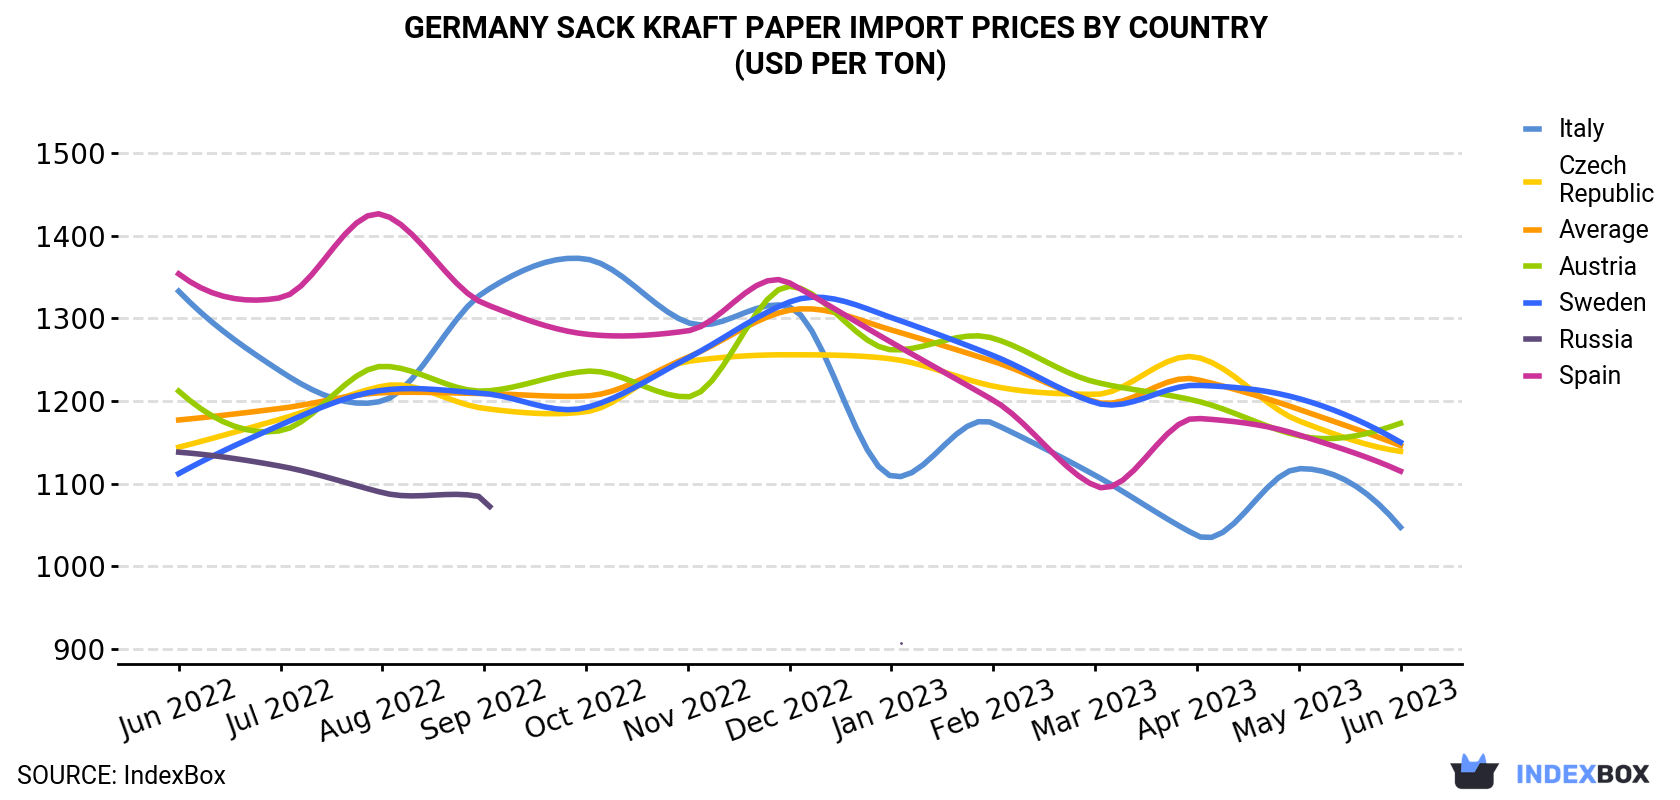 Germany Sack Kraft Paper Import Prices By Country (USD Per Ton)